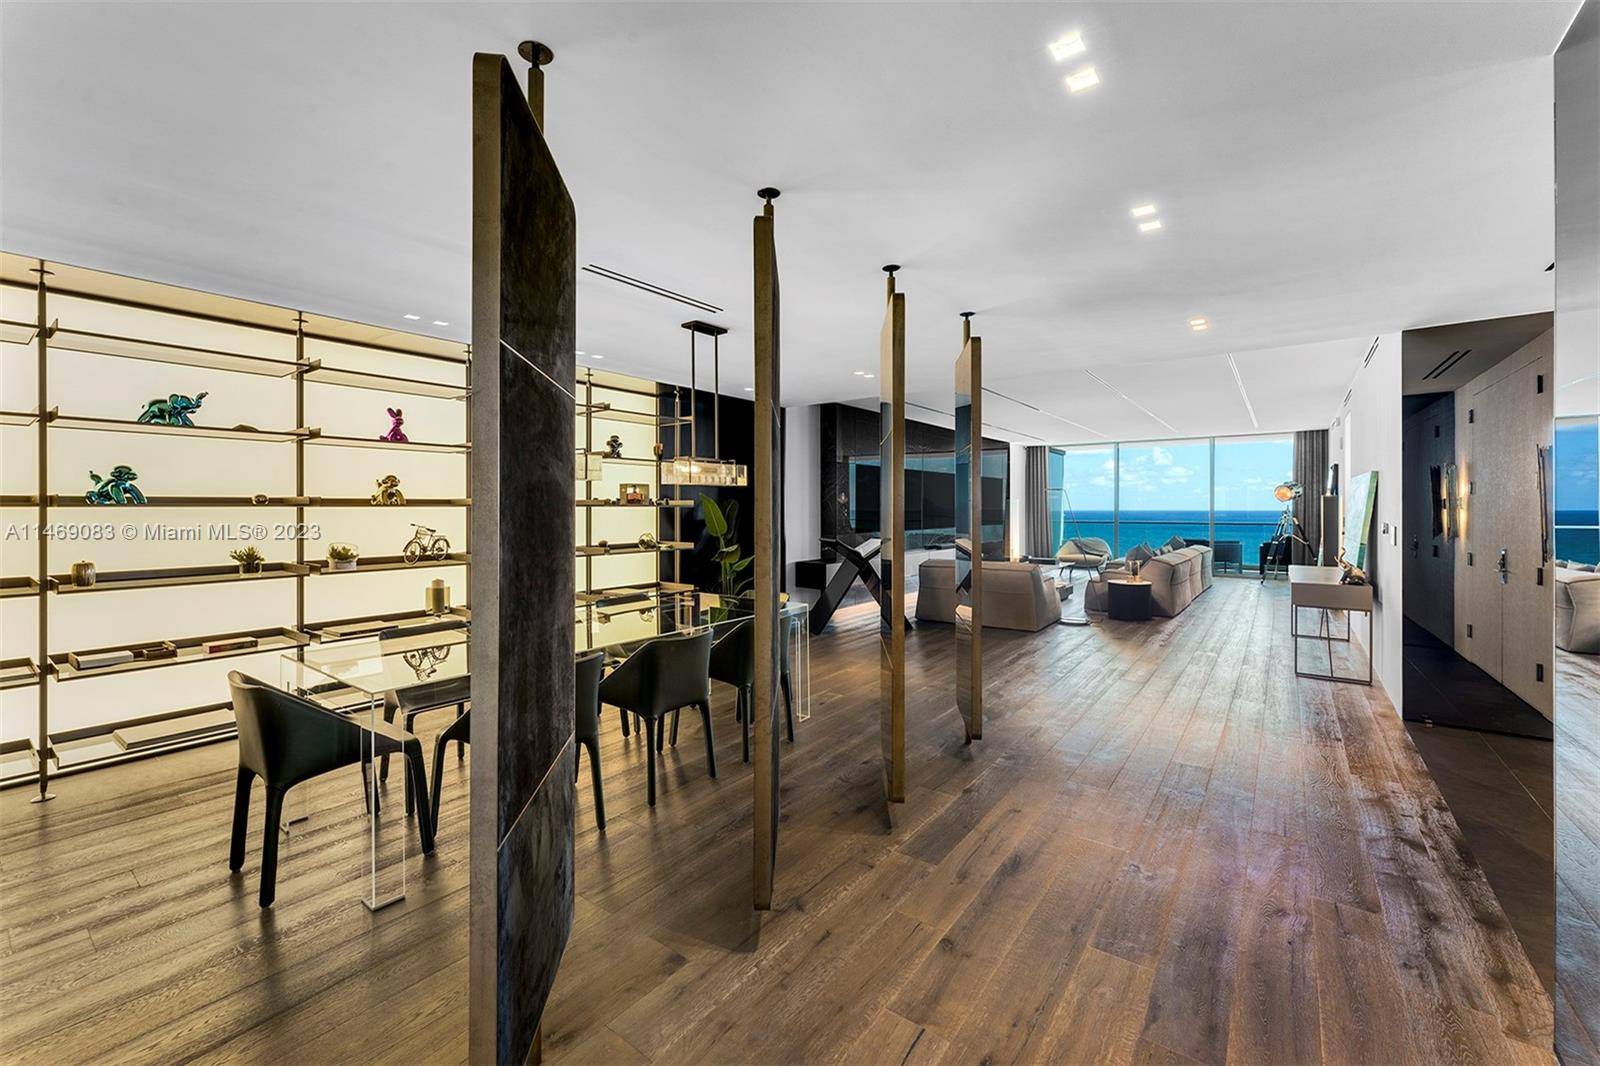 In the exclusive Bal Harbour enclave, an exceptional direct oceanfront residence by YODEZEEN Architectural Firm.